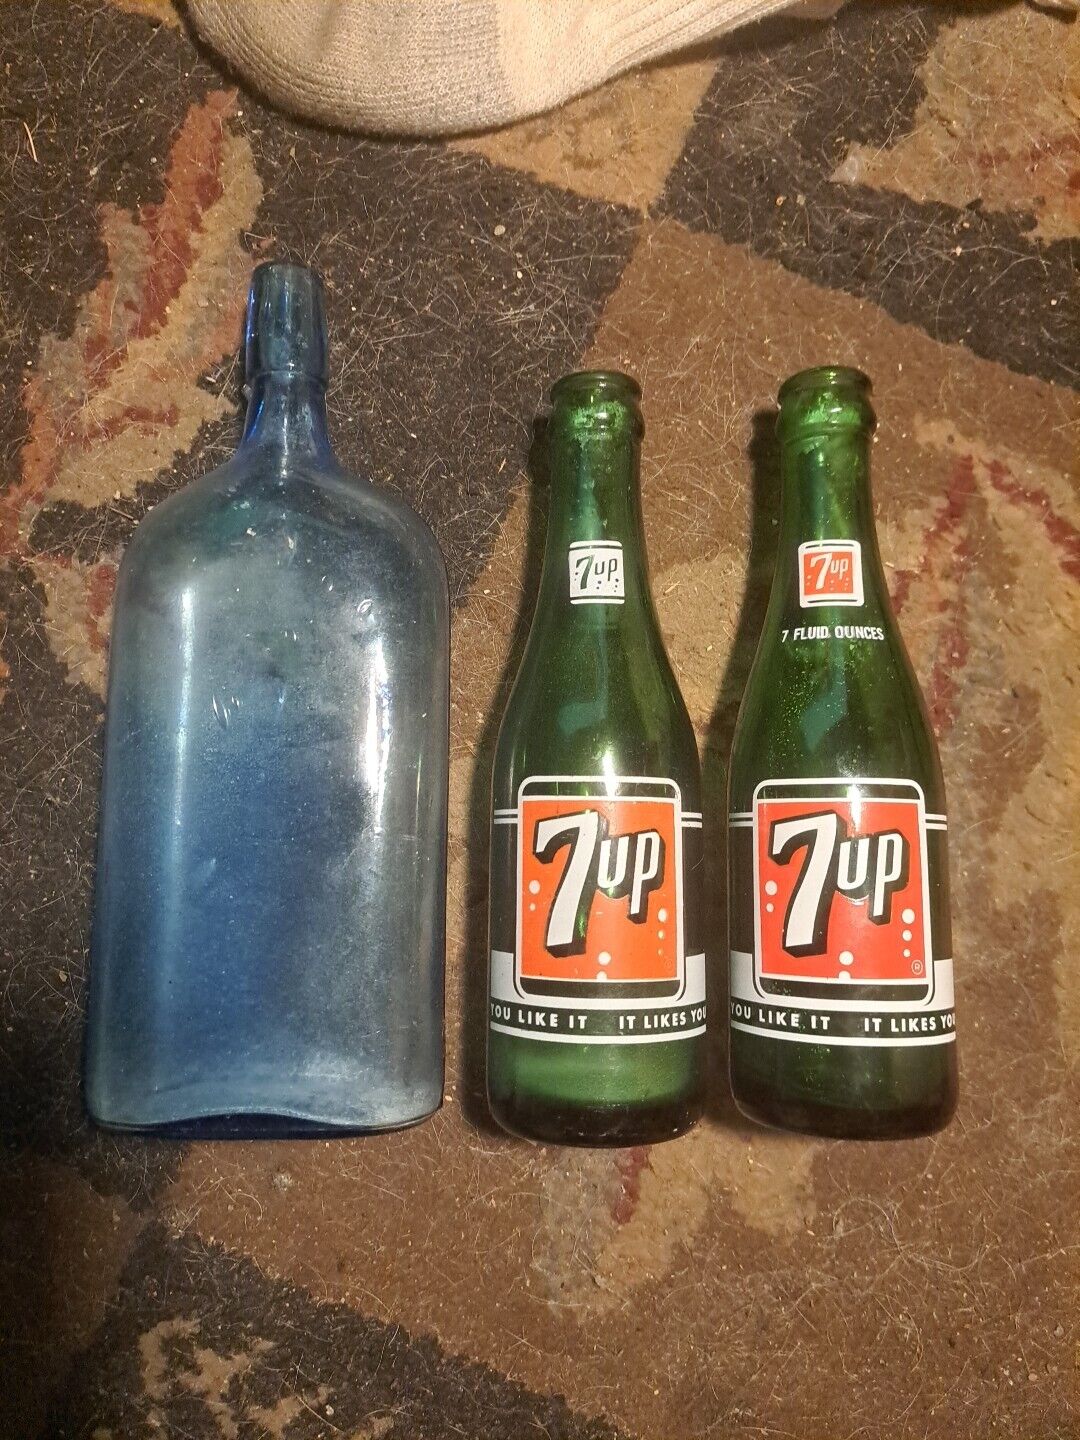 3 Old Bottles.,2 -7up & 1 Other Old One..3 Total